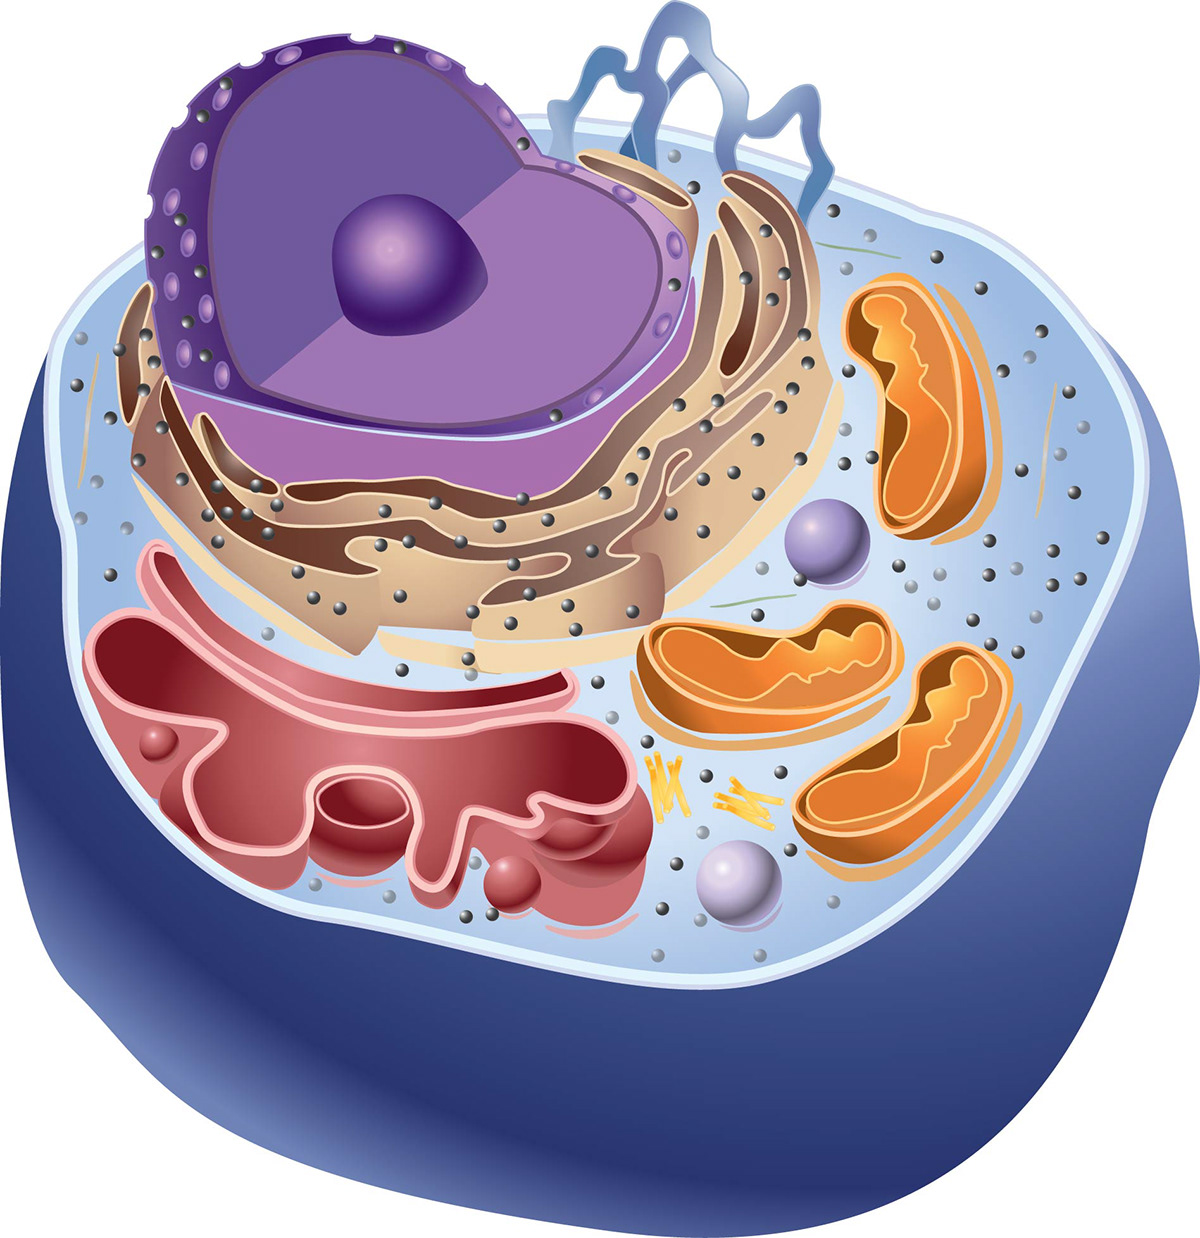 Animalcell plantcell